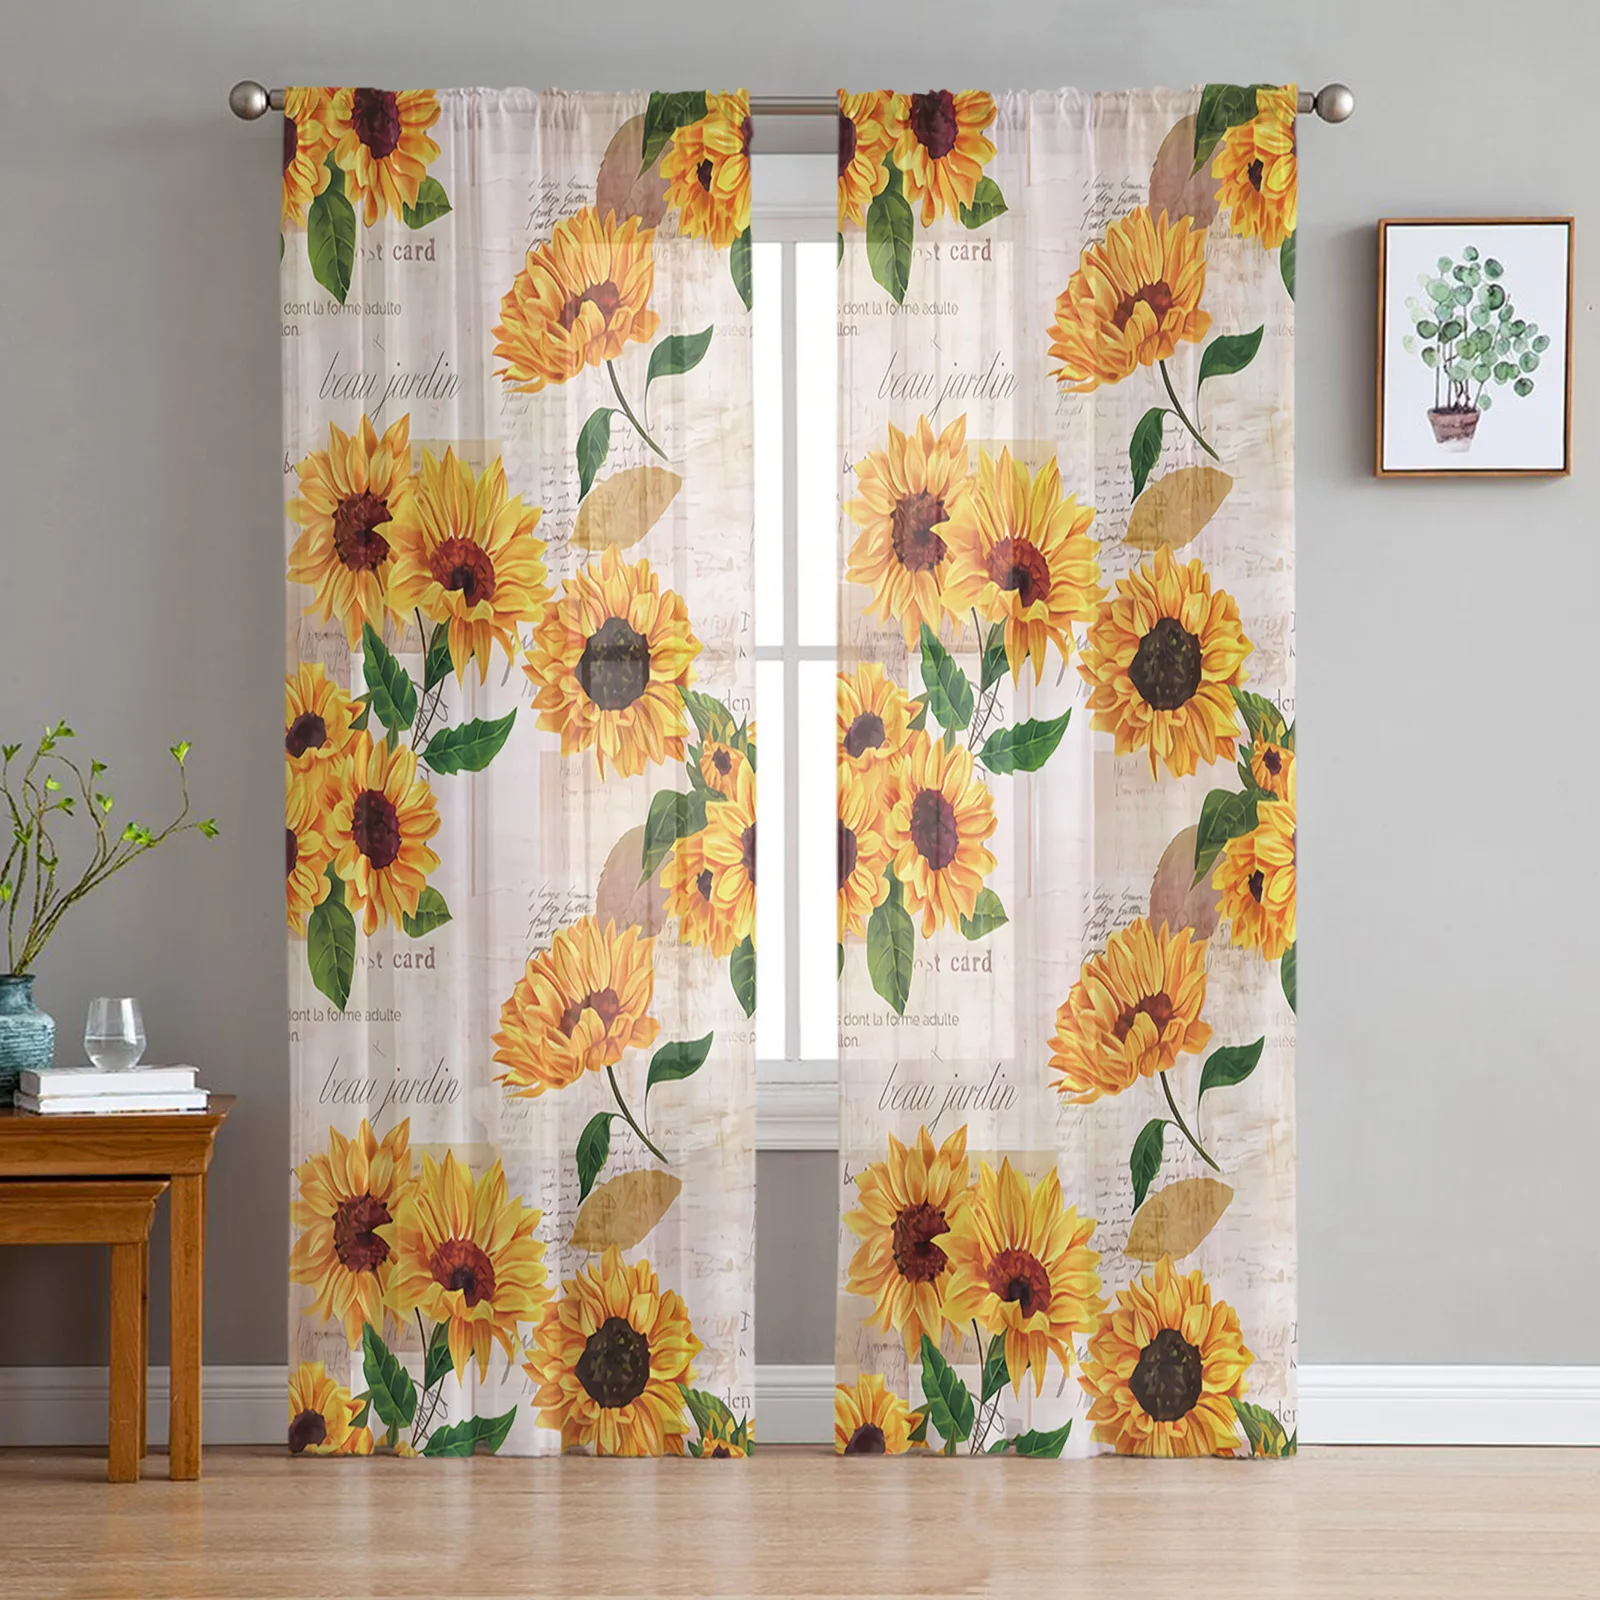 Decor Sheer Arrival Tulle Living Room 1*2 M Sunflower Voile Curtains Pattern 